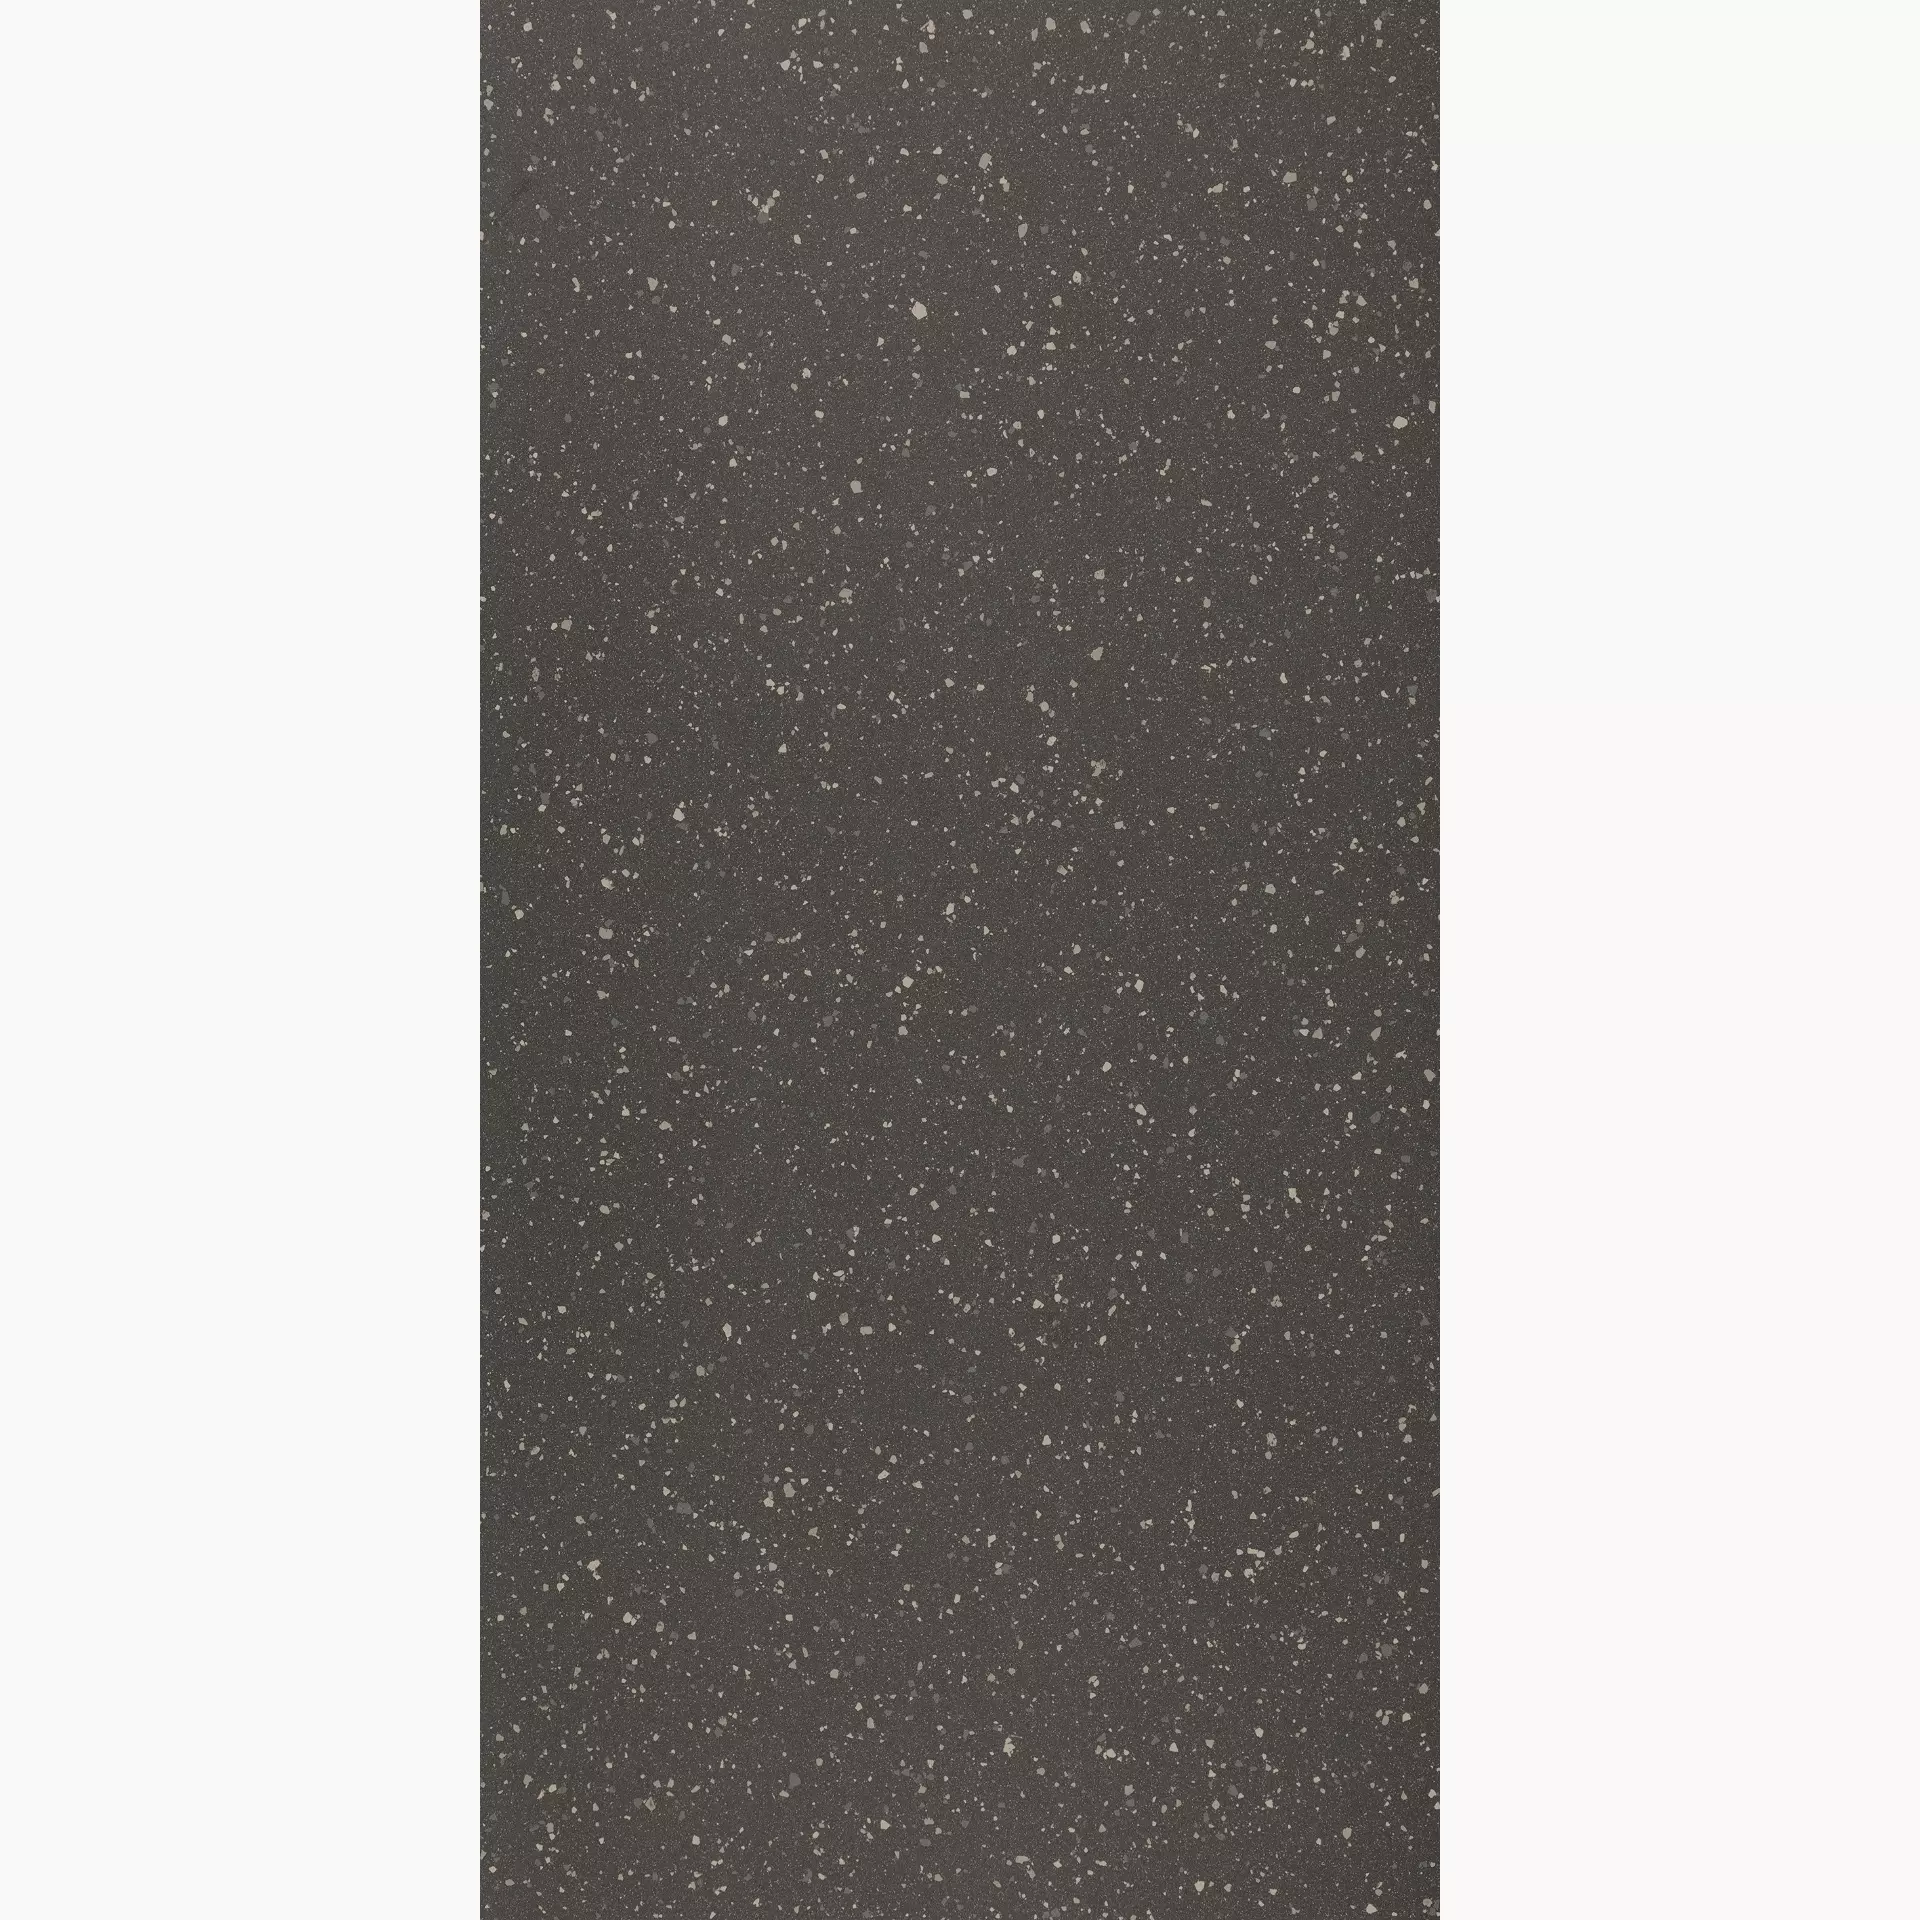 Florim Earthtech Carbon_Flakes Glossy - Bright 776927 120x240cm rectified 9mm